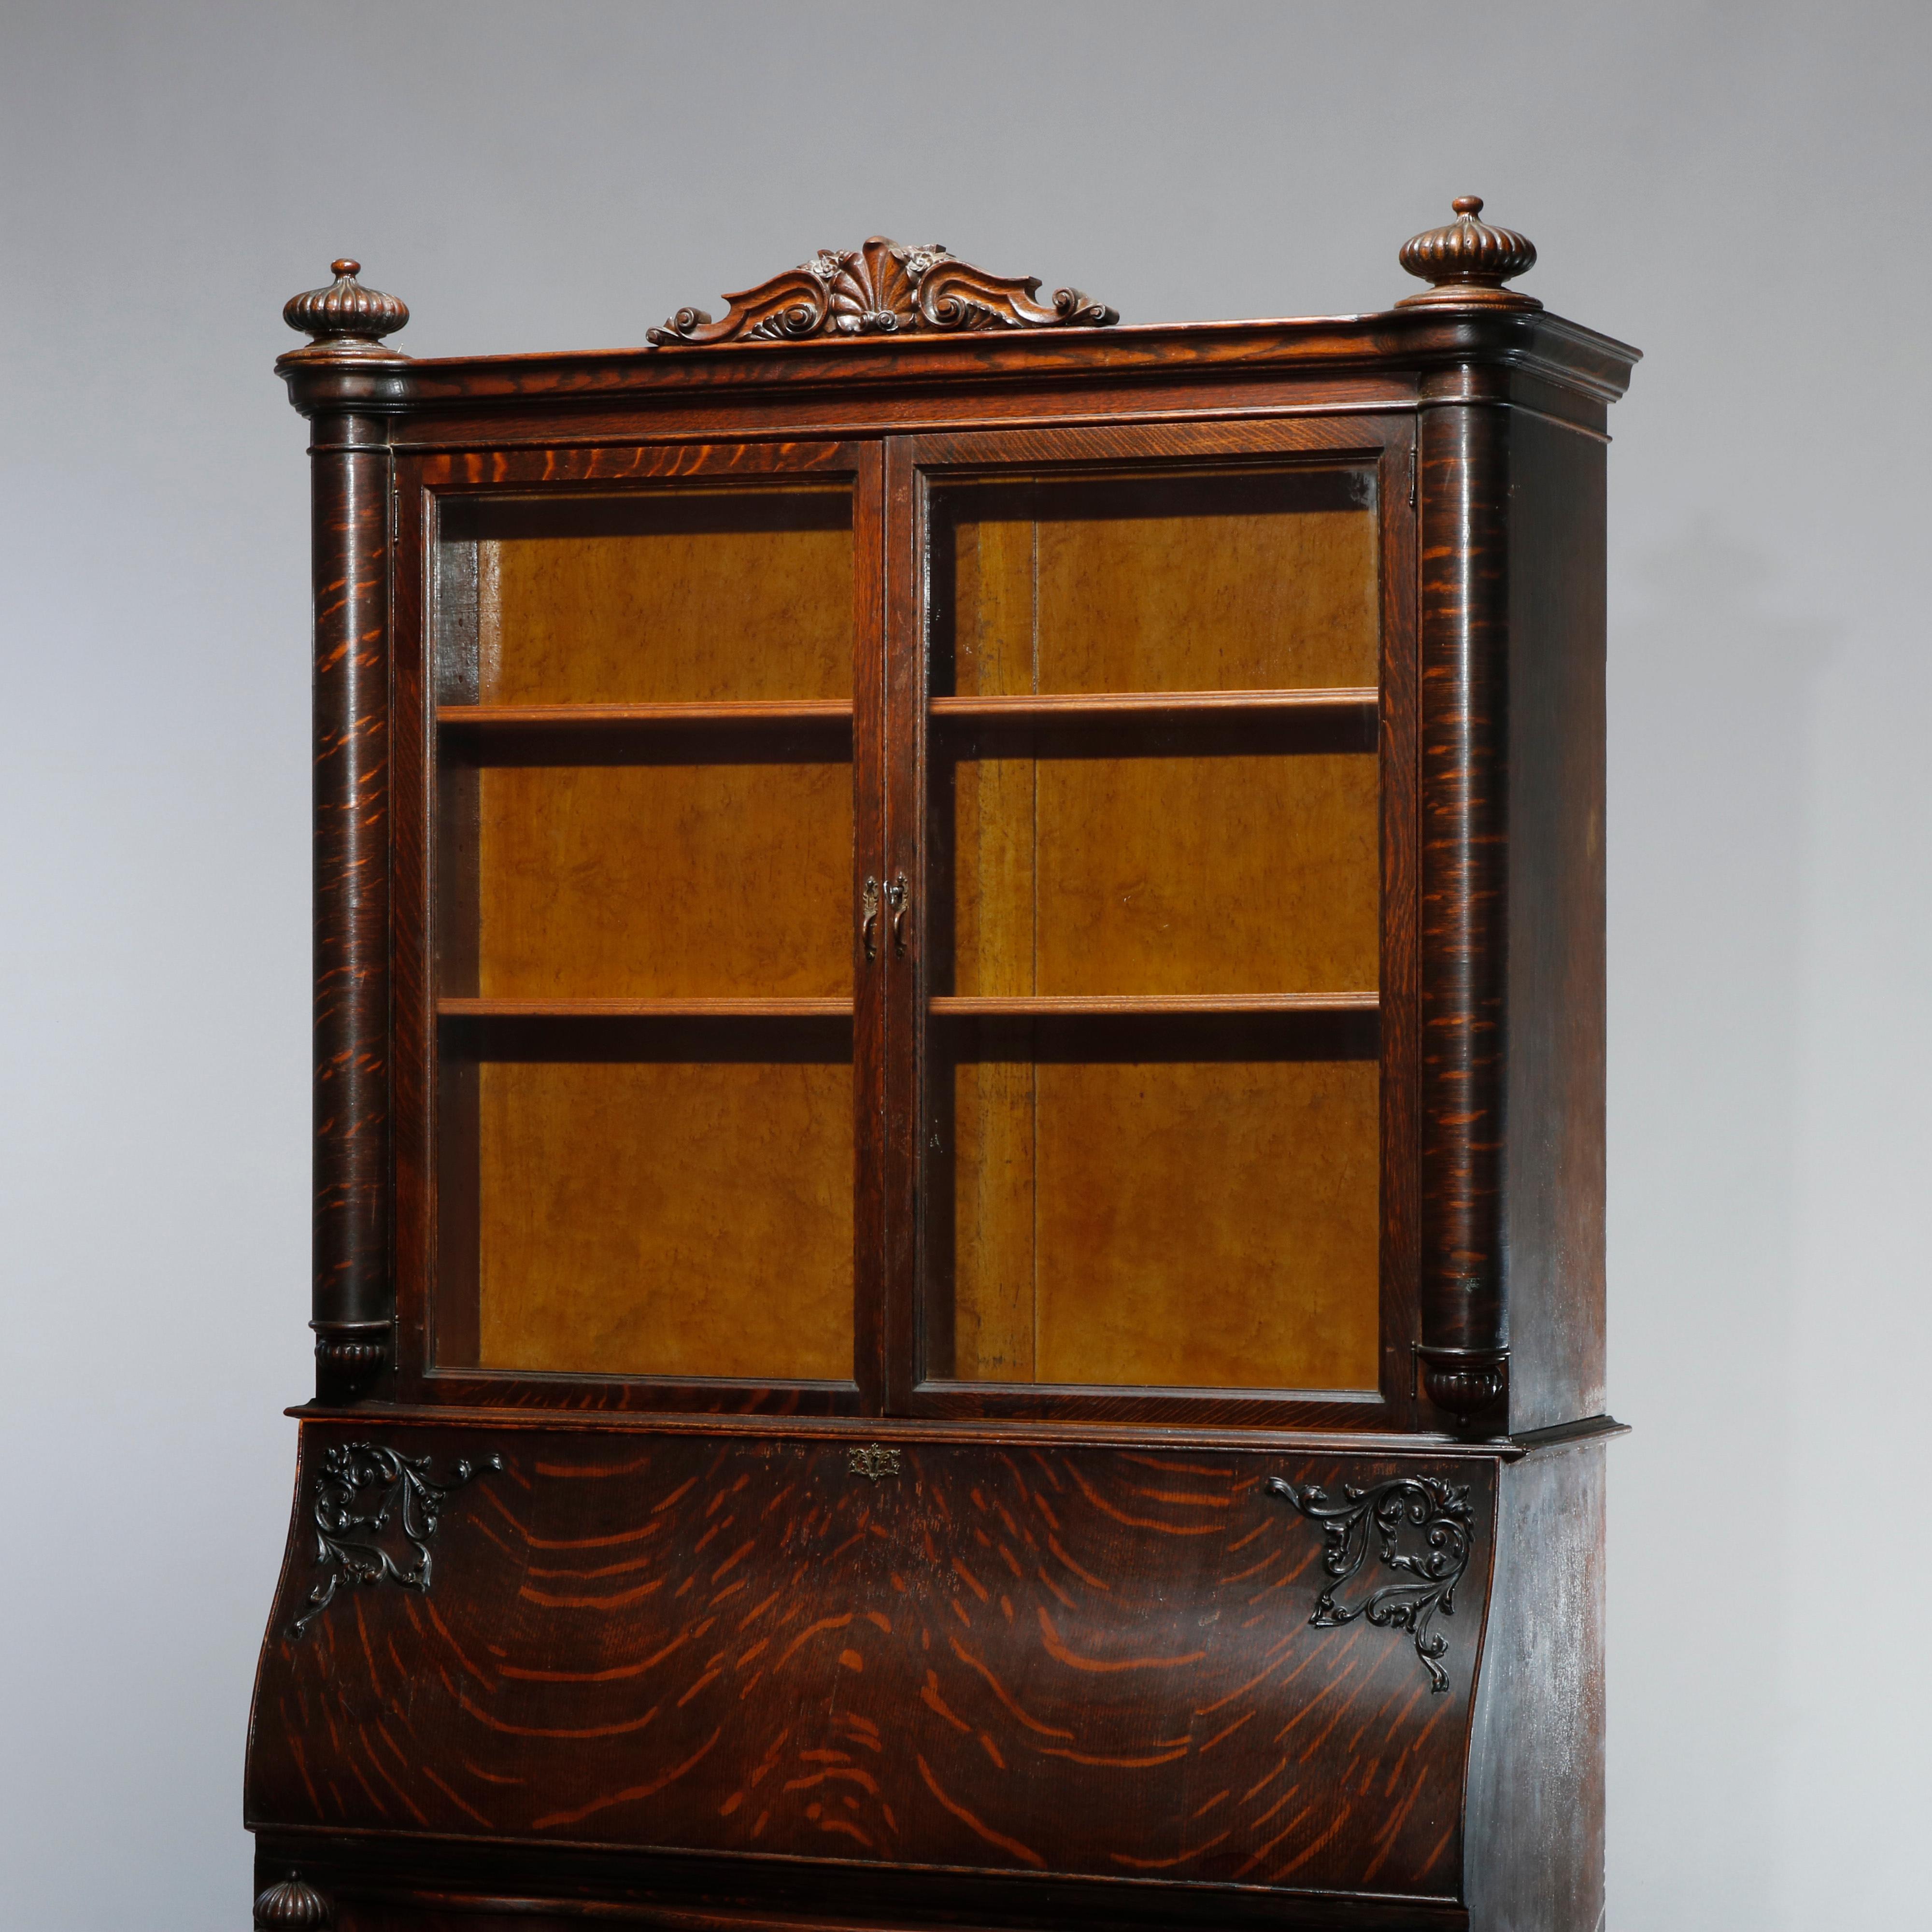 An antique secretary in the manner of RJ Horner offers quarter sawn oak construction with upper case having carved and pierced foliate crest flanked by melon bun finials over double glass doors opening to shelved interior; lower with drop front desk